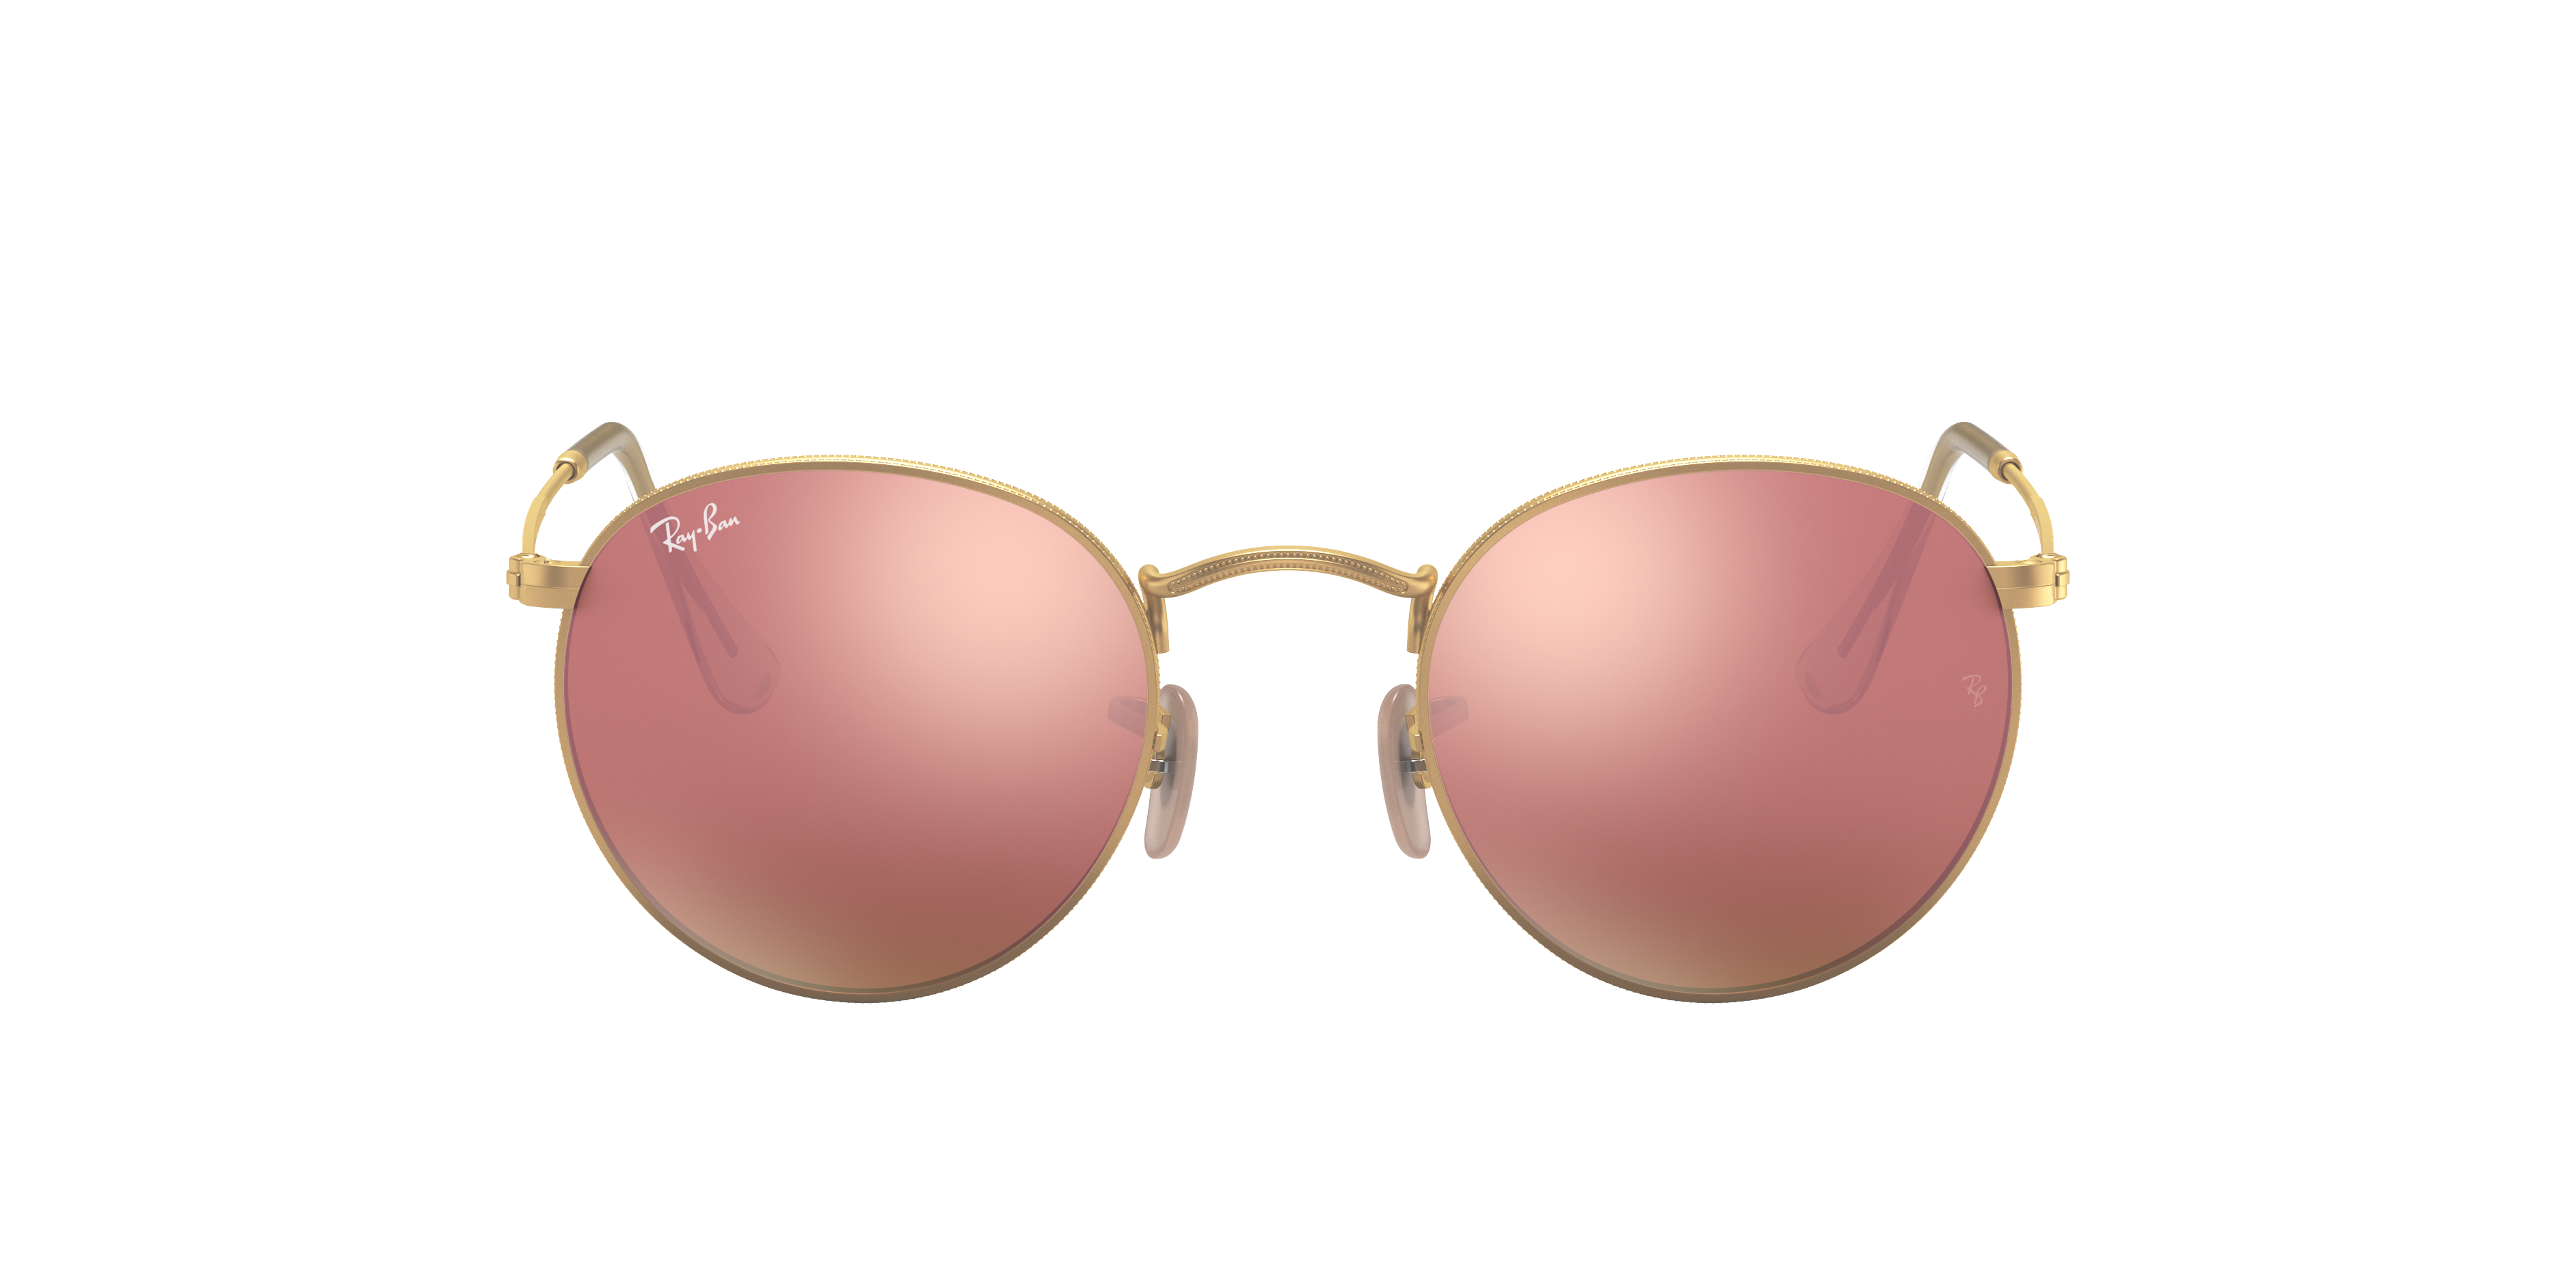 Ray-Ban Sunglasses in Gold | Target Optical